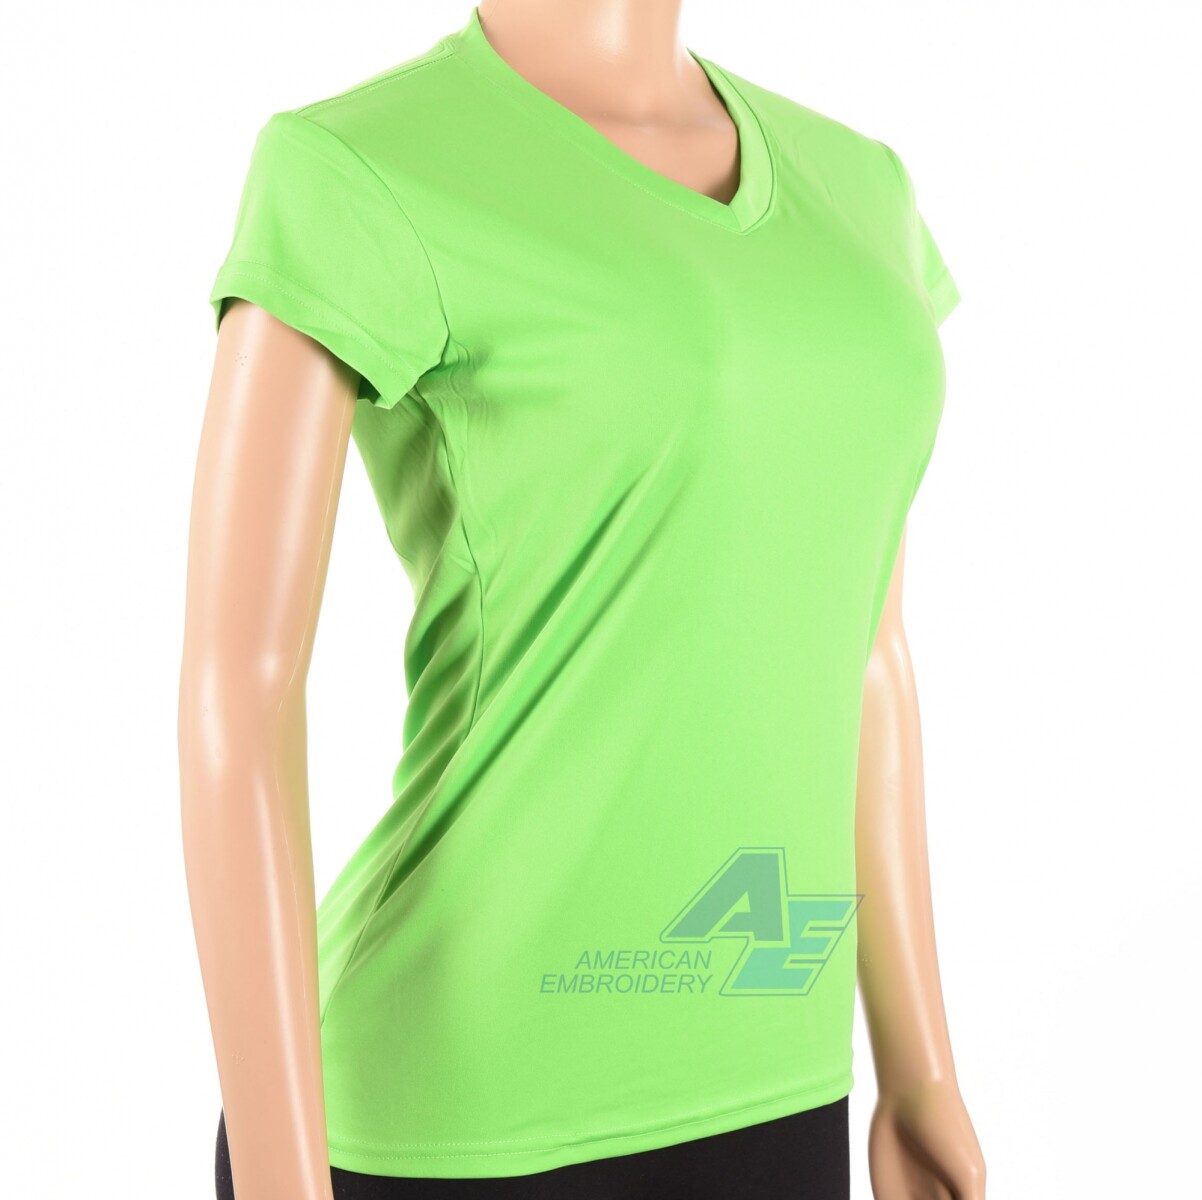 Remera Dry Fit Dama - Verde fluo 